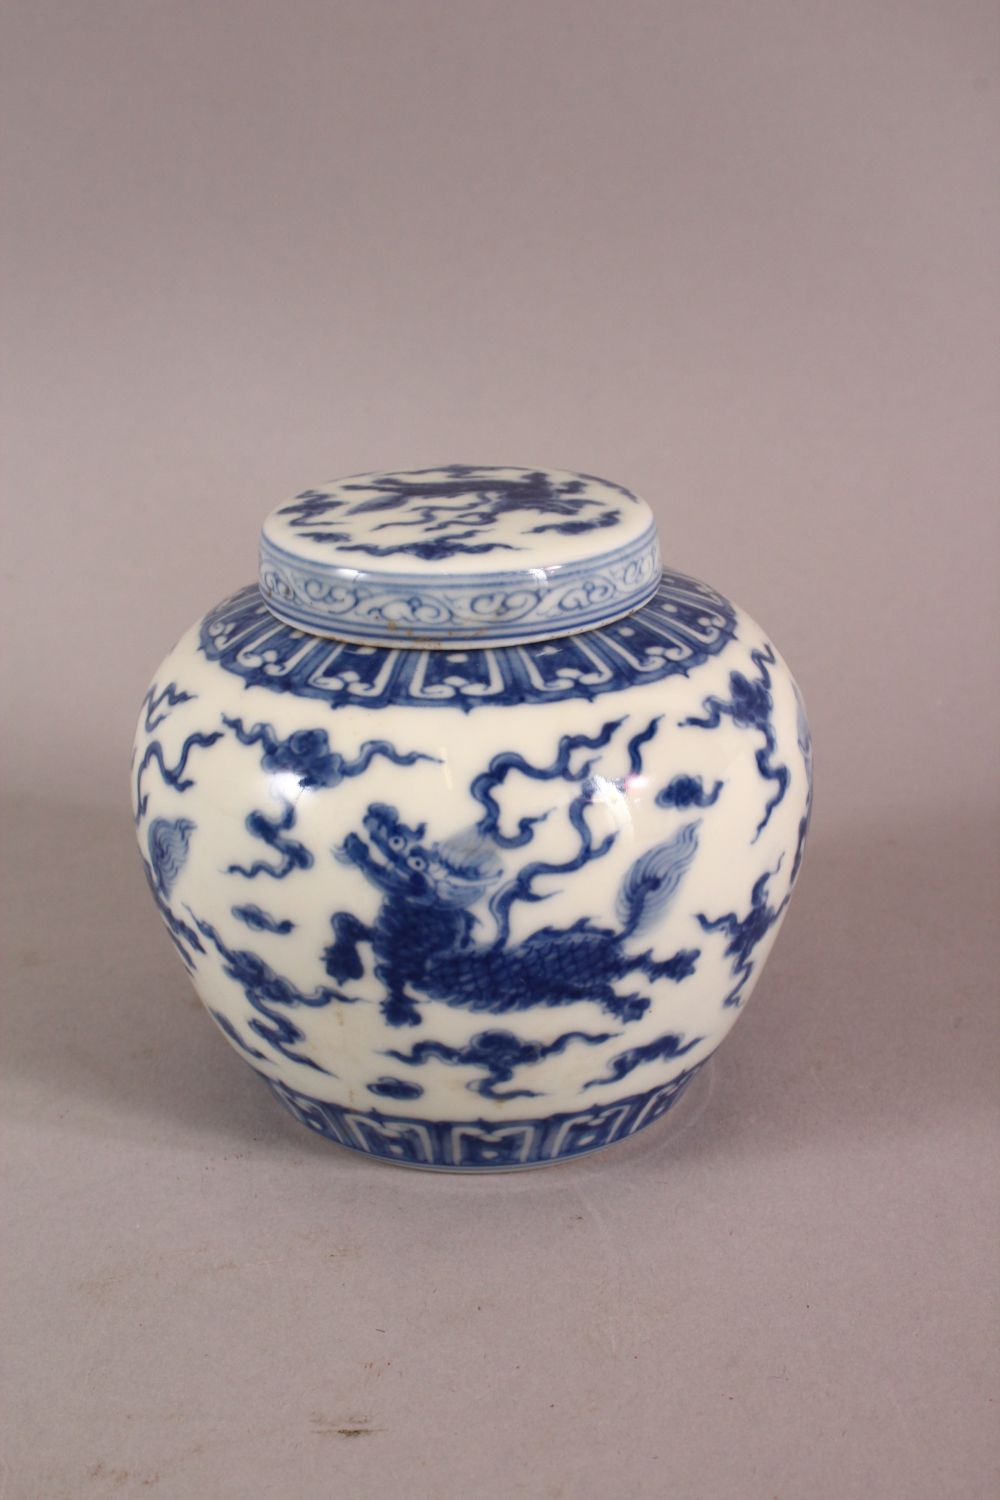 A CHINESE BLUE & WHITE PORCELAIN JAR & COVER, with decoration of kylin and clouds, base with a mark, - Image 3 of 7